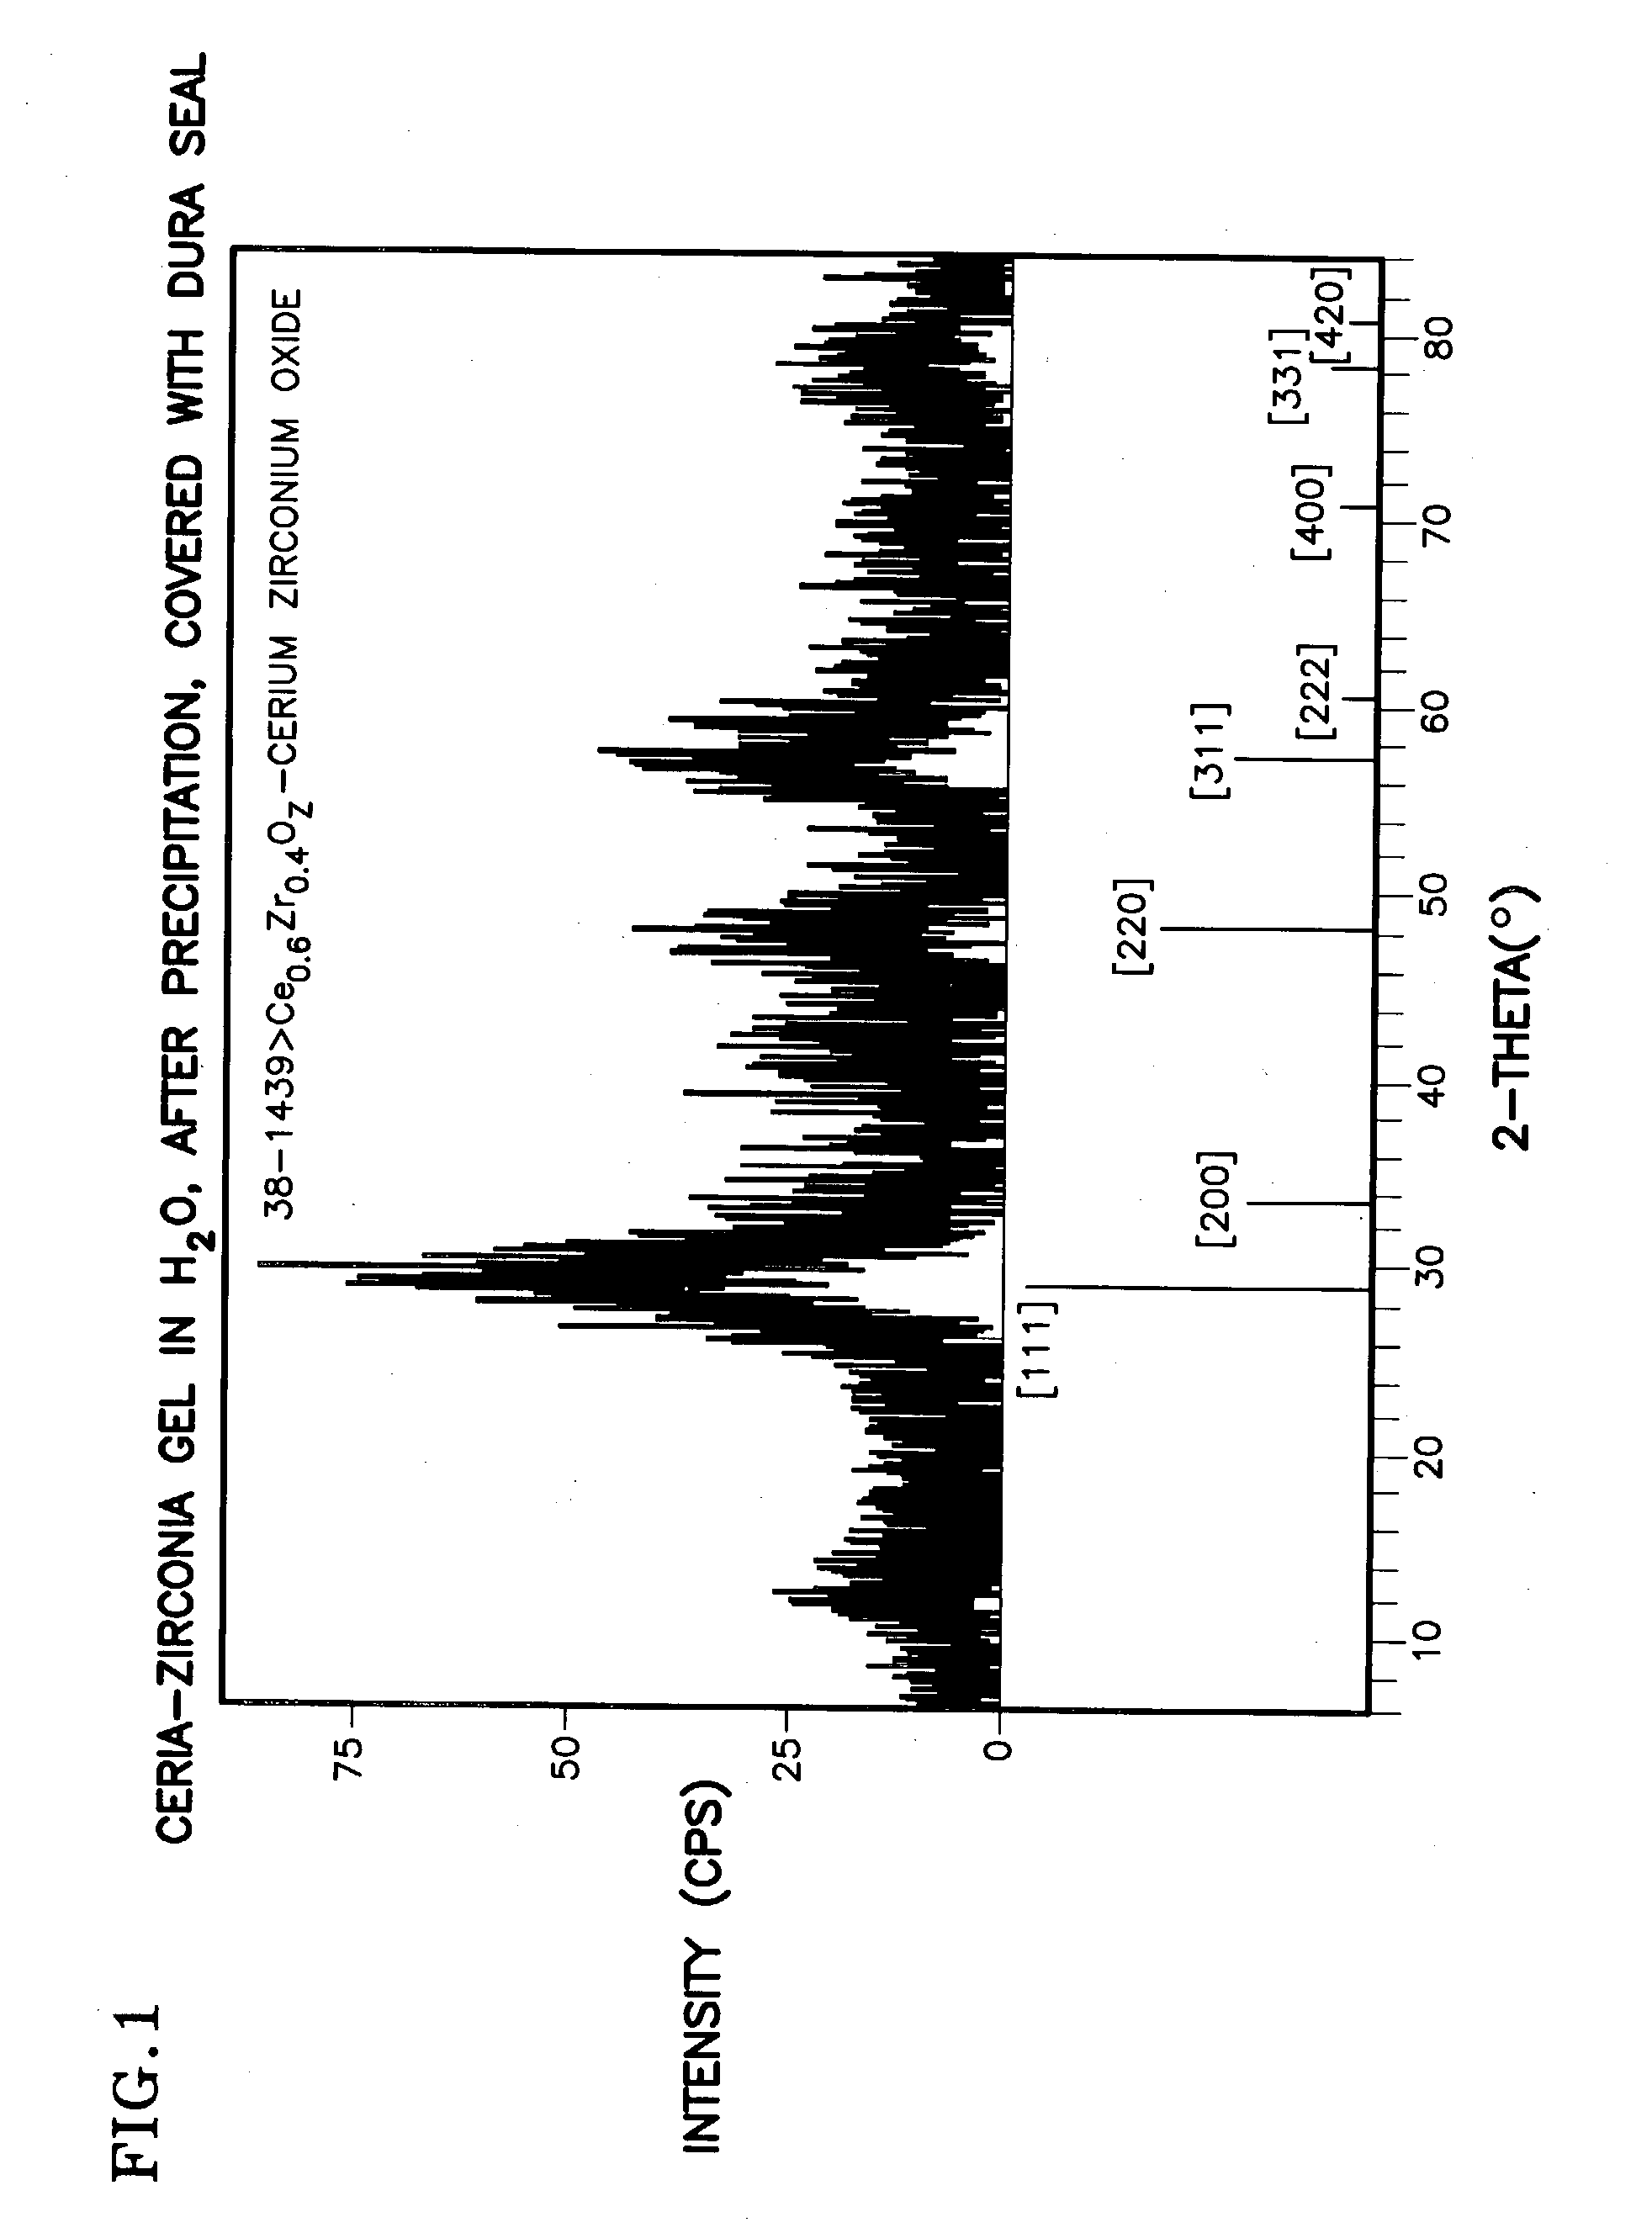 Ceria-based mixed-metal oxide structure, including method of making and use